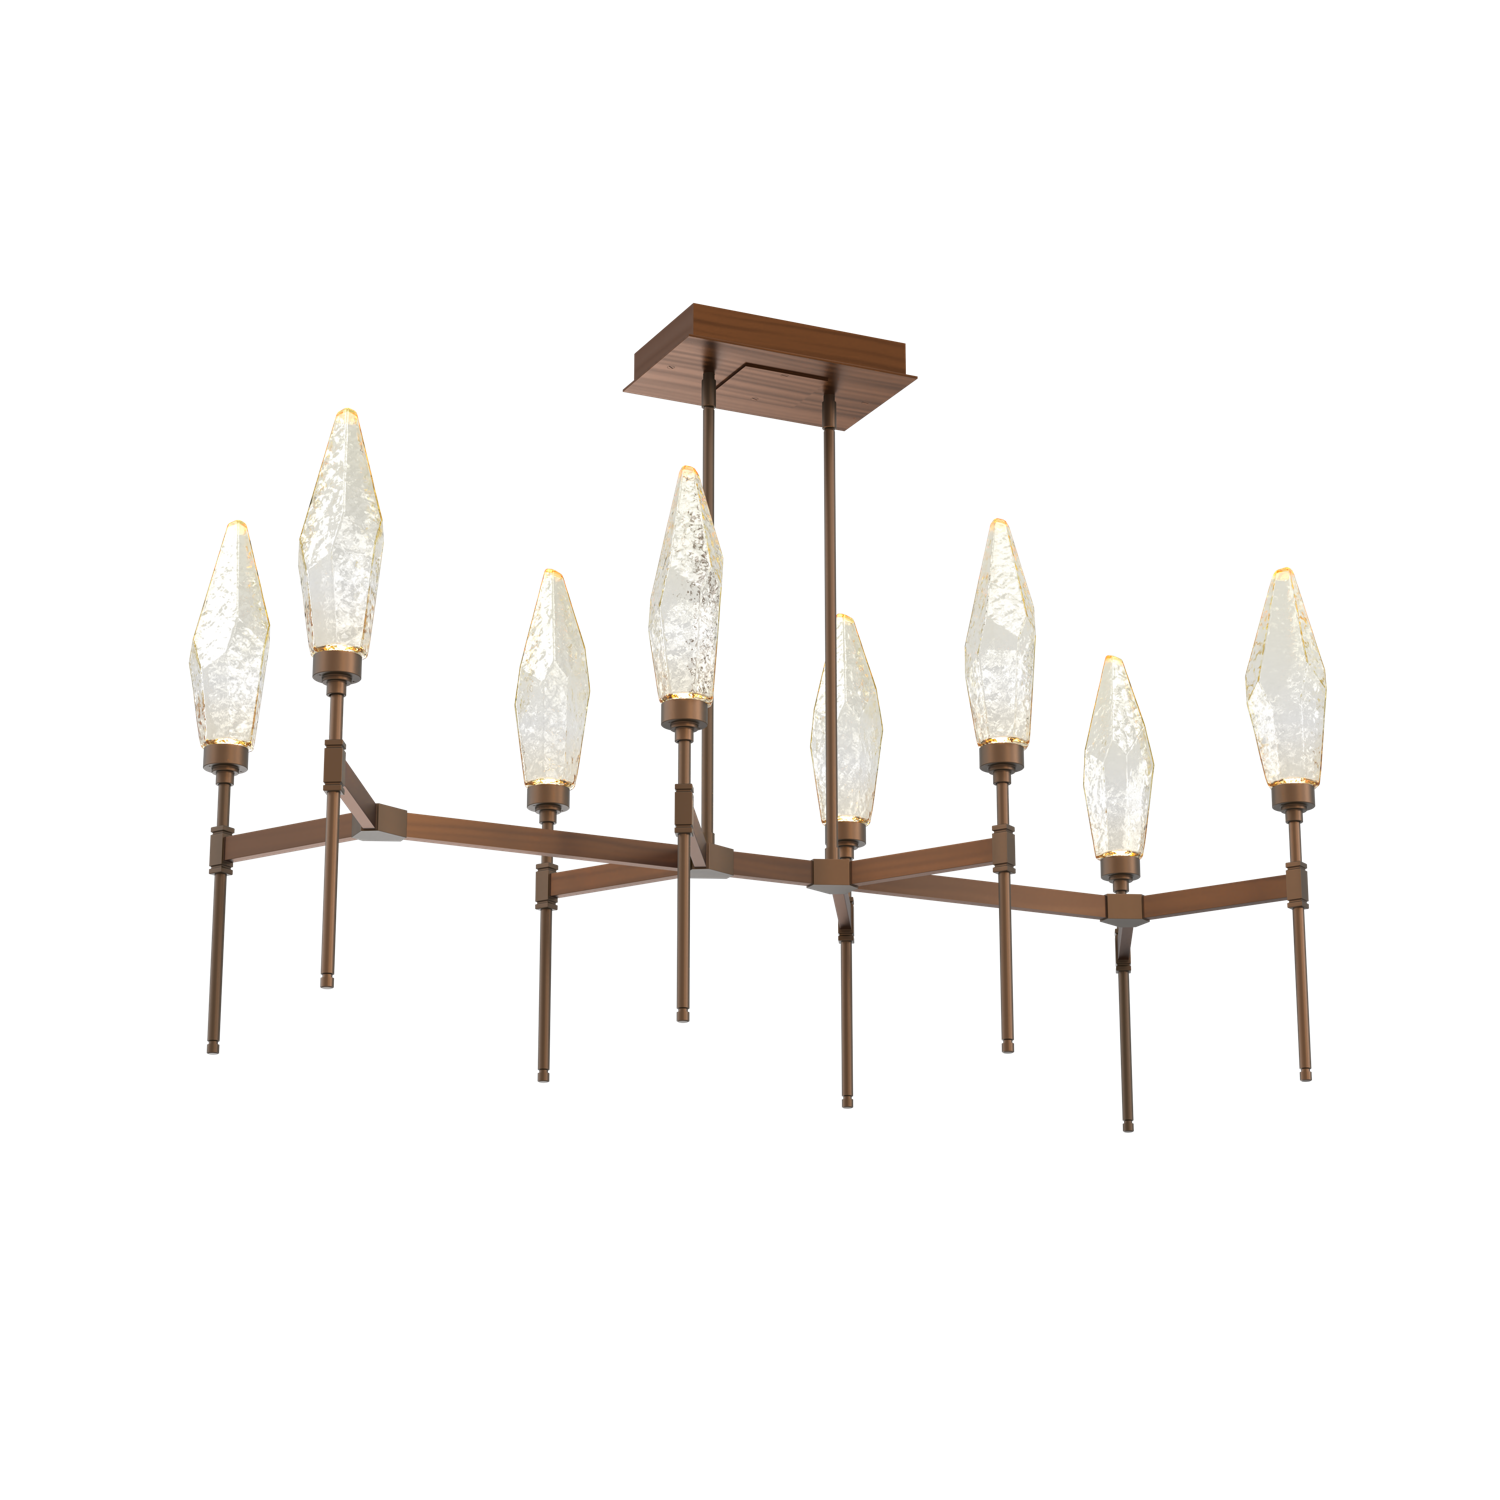 PLB0050-48-RB-CA-Hammerton-Studio-Rock-Crystal-48-inch-linear-belvedere-chandelier-with-oil-rubbed-bronze-finish-and-chilled-amber-blown-glass-shades-and-LED-lamping